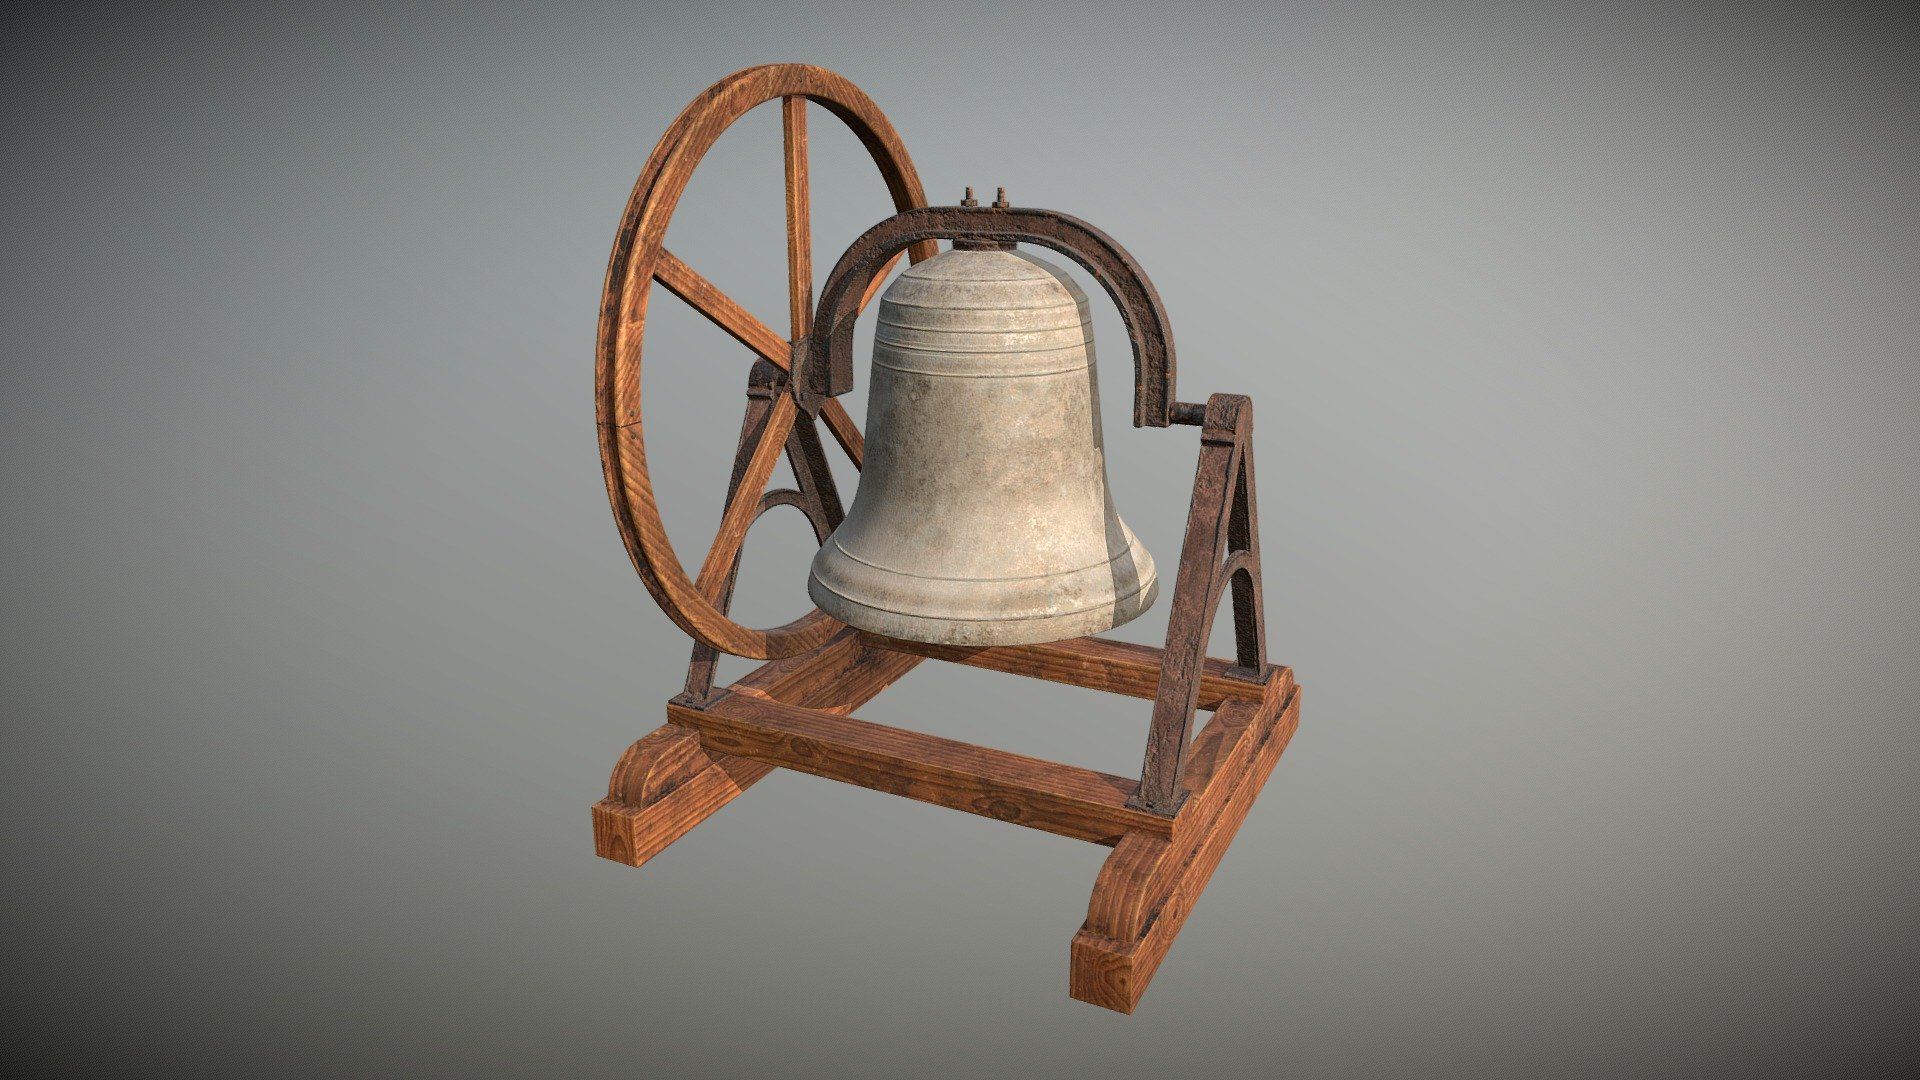 Modeled in Blender.  Textured in Substance Painter.  Inspired by photos my mom shared of a beautiful church bell 3d model